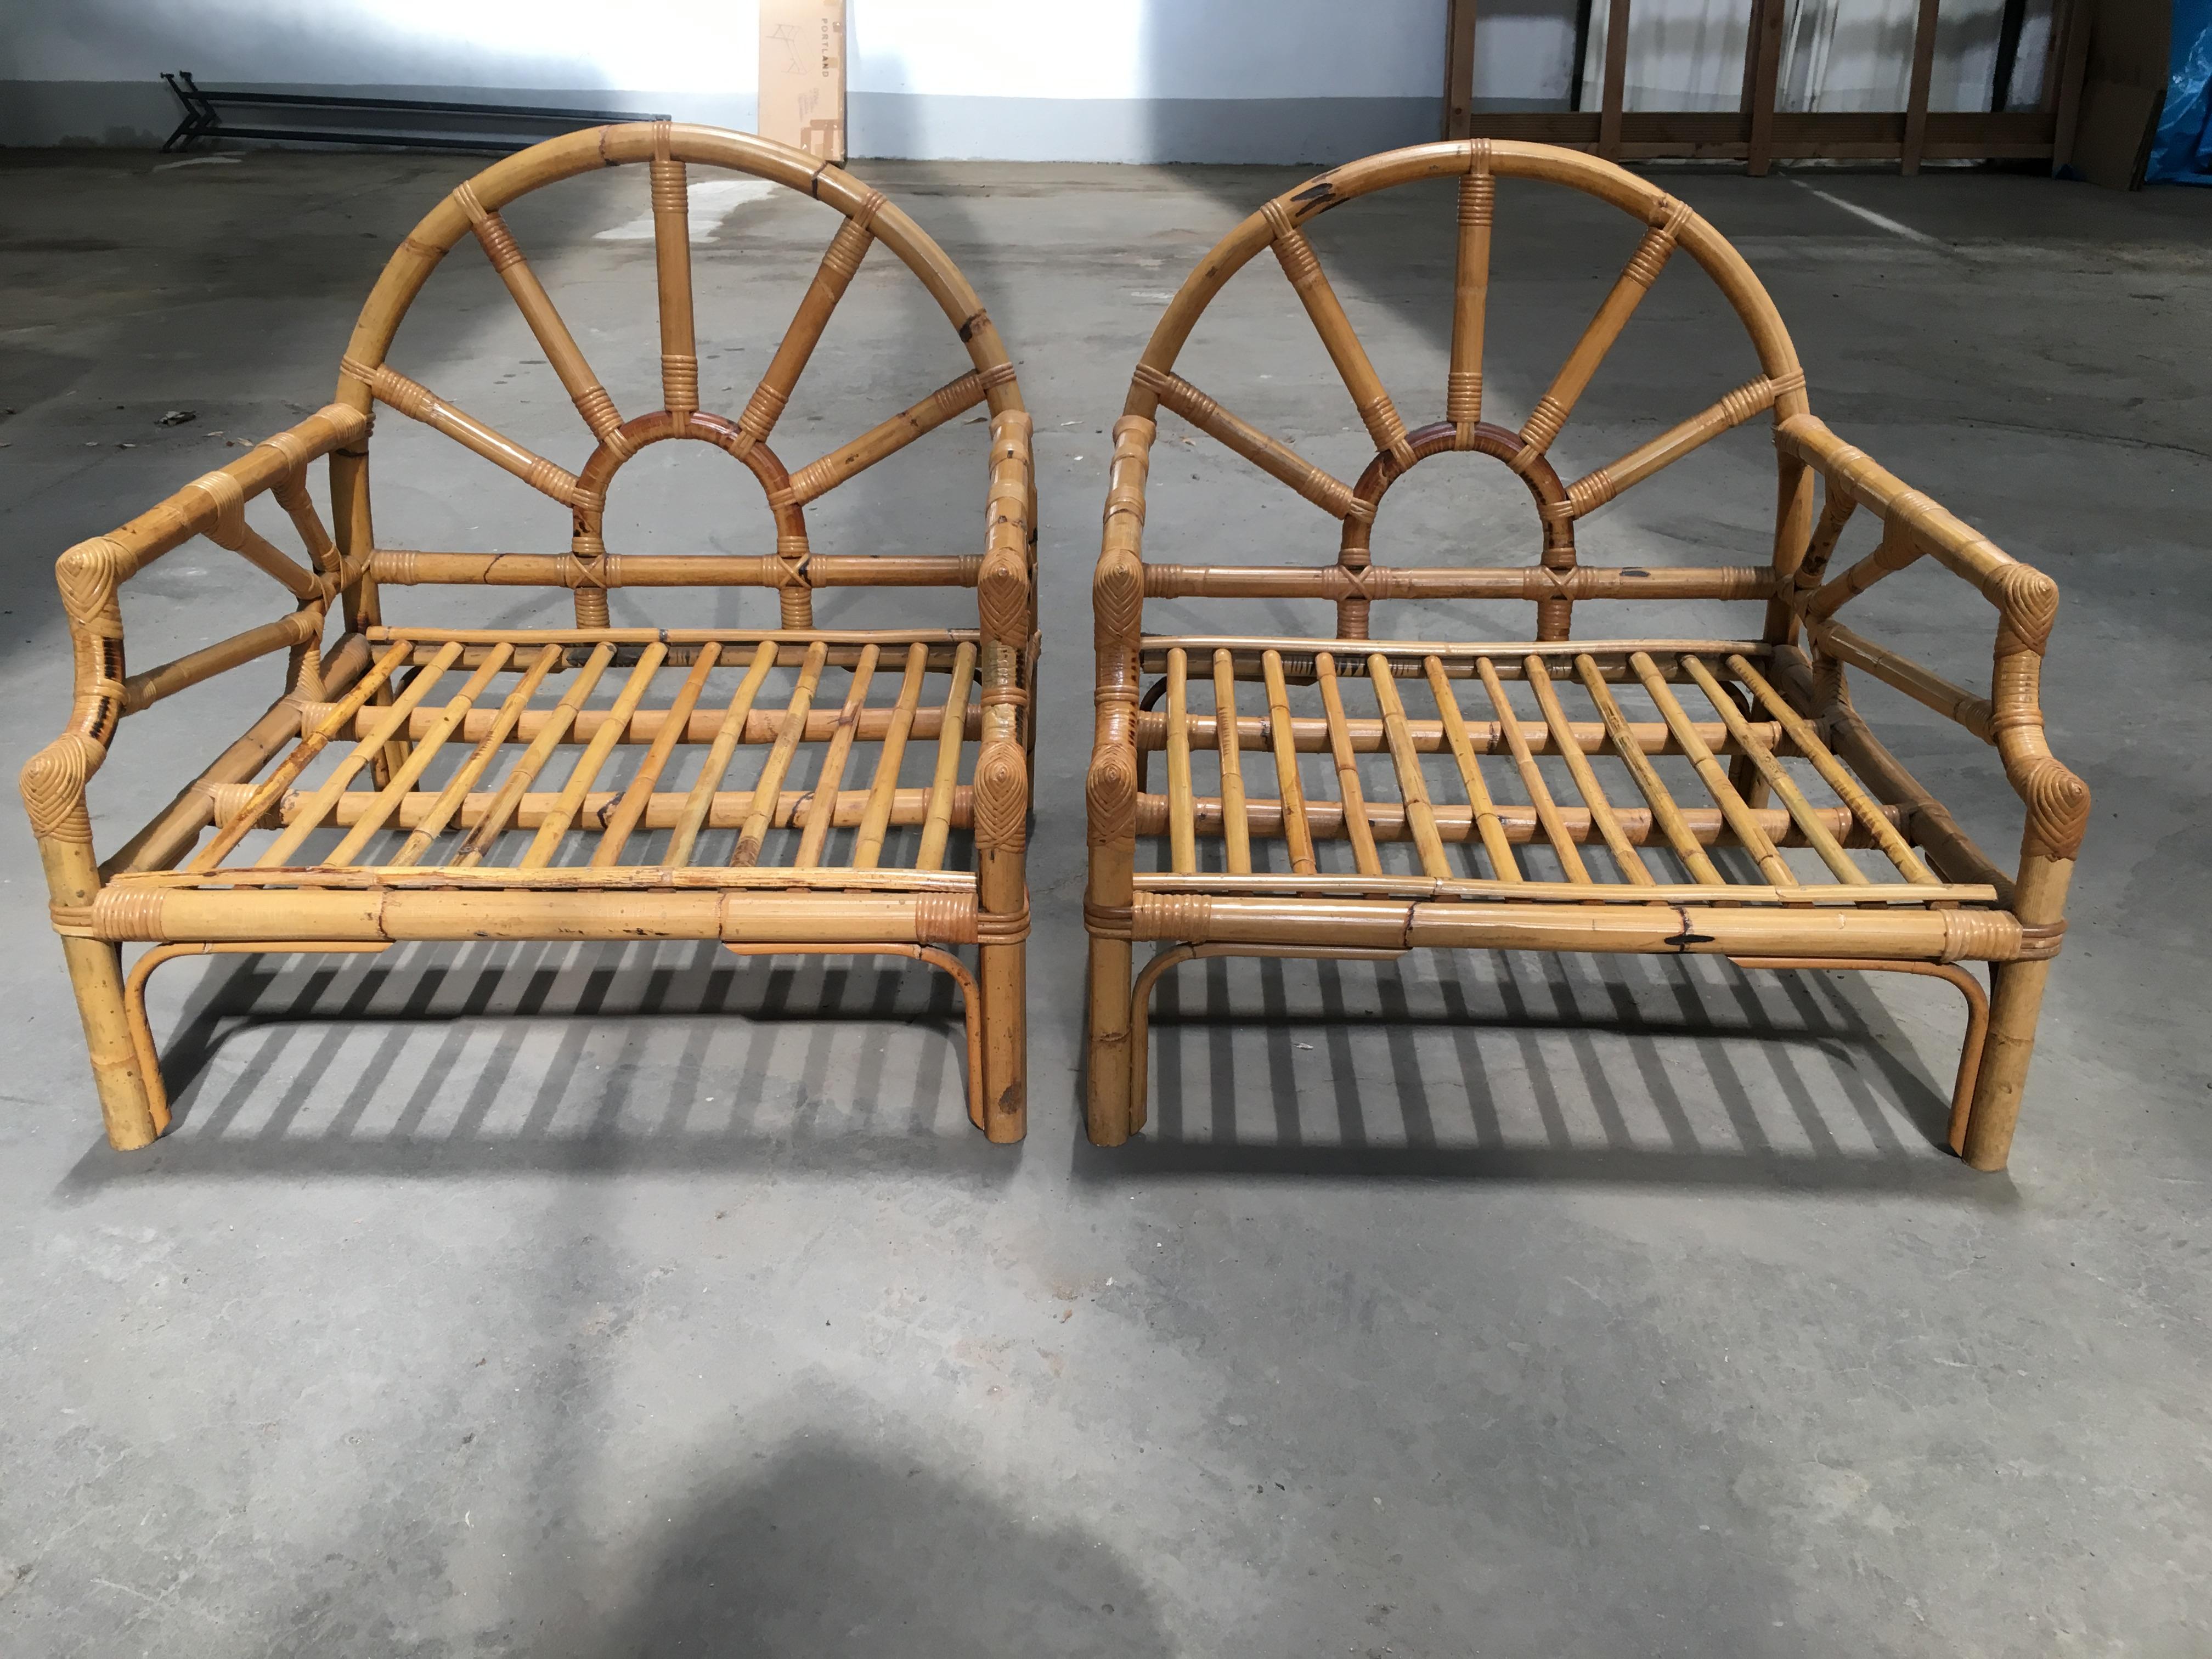 Mid-Century Modern Italian pair of bamboo and rattan armchairs by Vivai del Sud from 1970s.
The set comes with its original white Cotton Fabric cushions as shown in the photo.